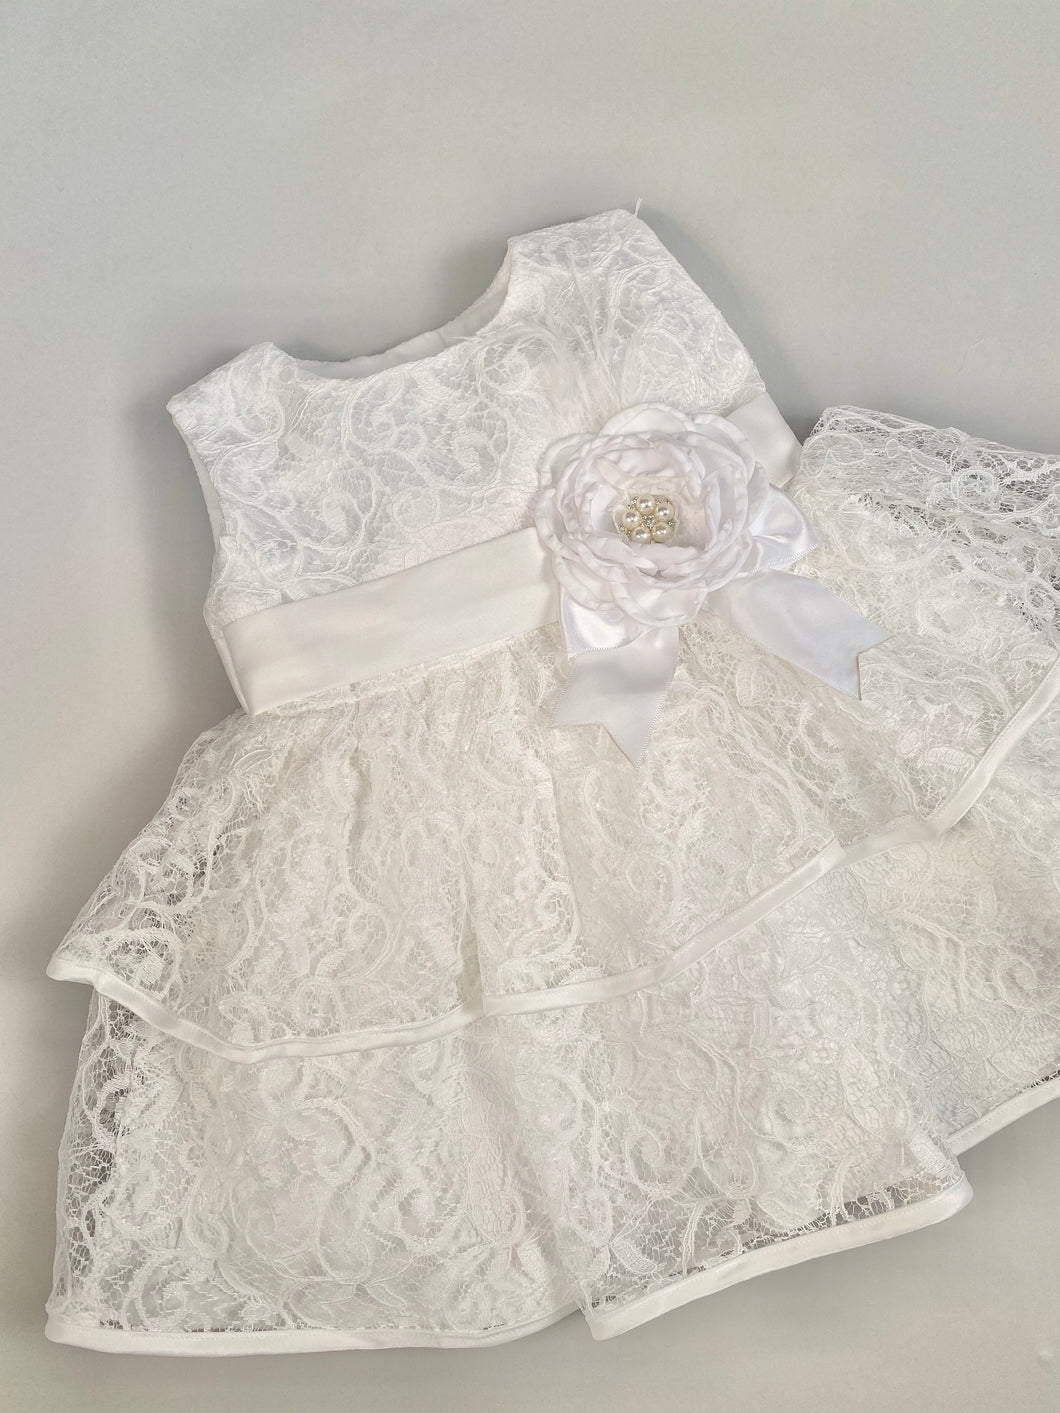 Dress 6 Girls Embroidered Lace Layered Dress with Pearl Flower